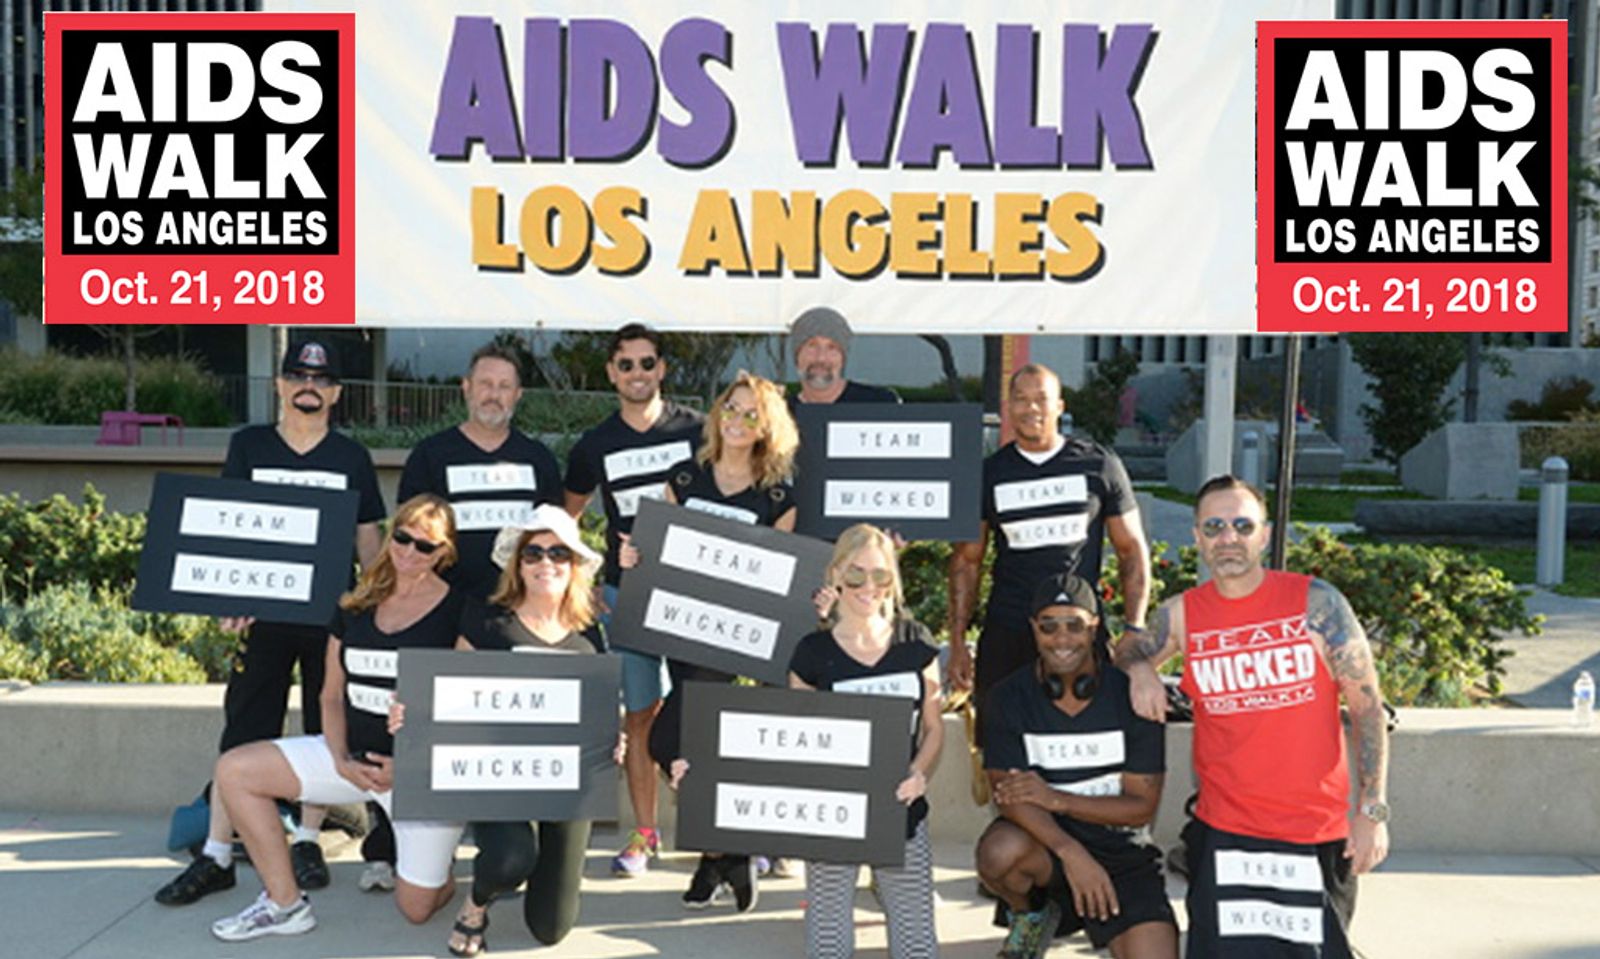 Drake Sends Last Call to Join #TEAMWICKED for 2018 AIDS Walk LA